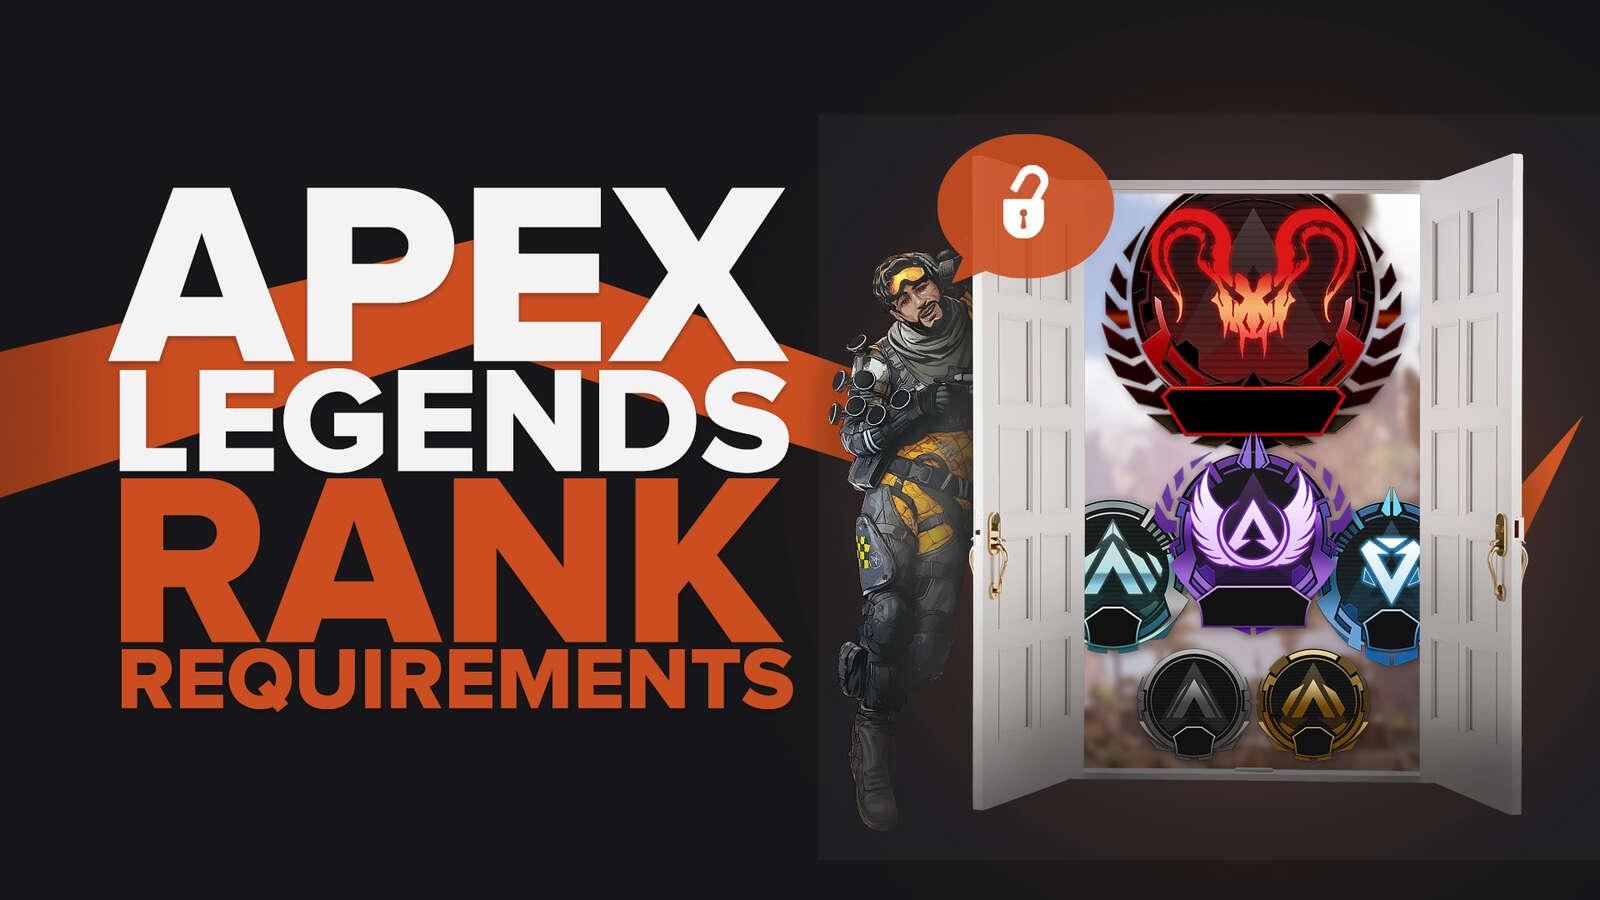 Apex Legends Ranked Requirements: What You Need To Know